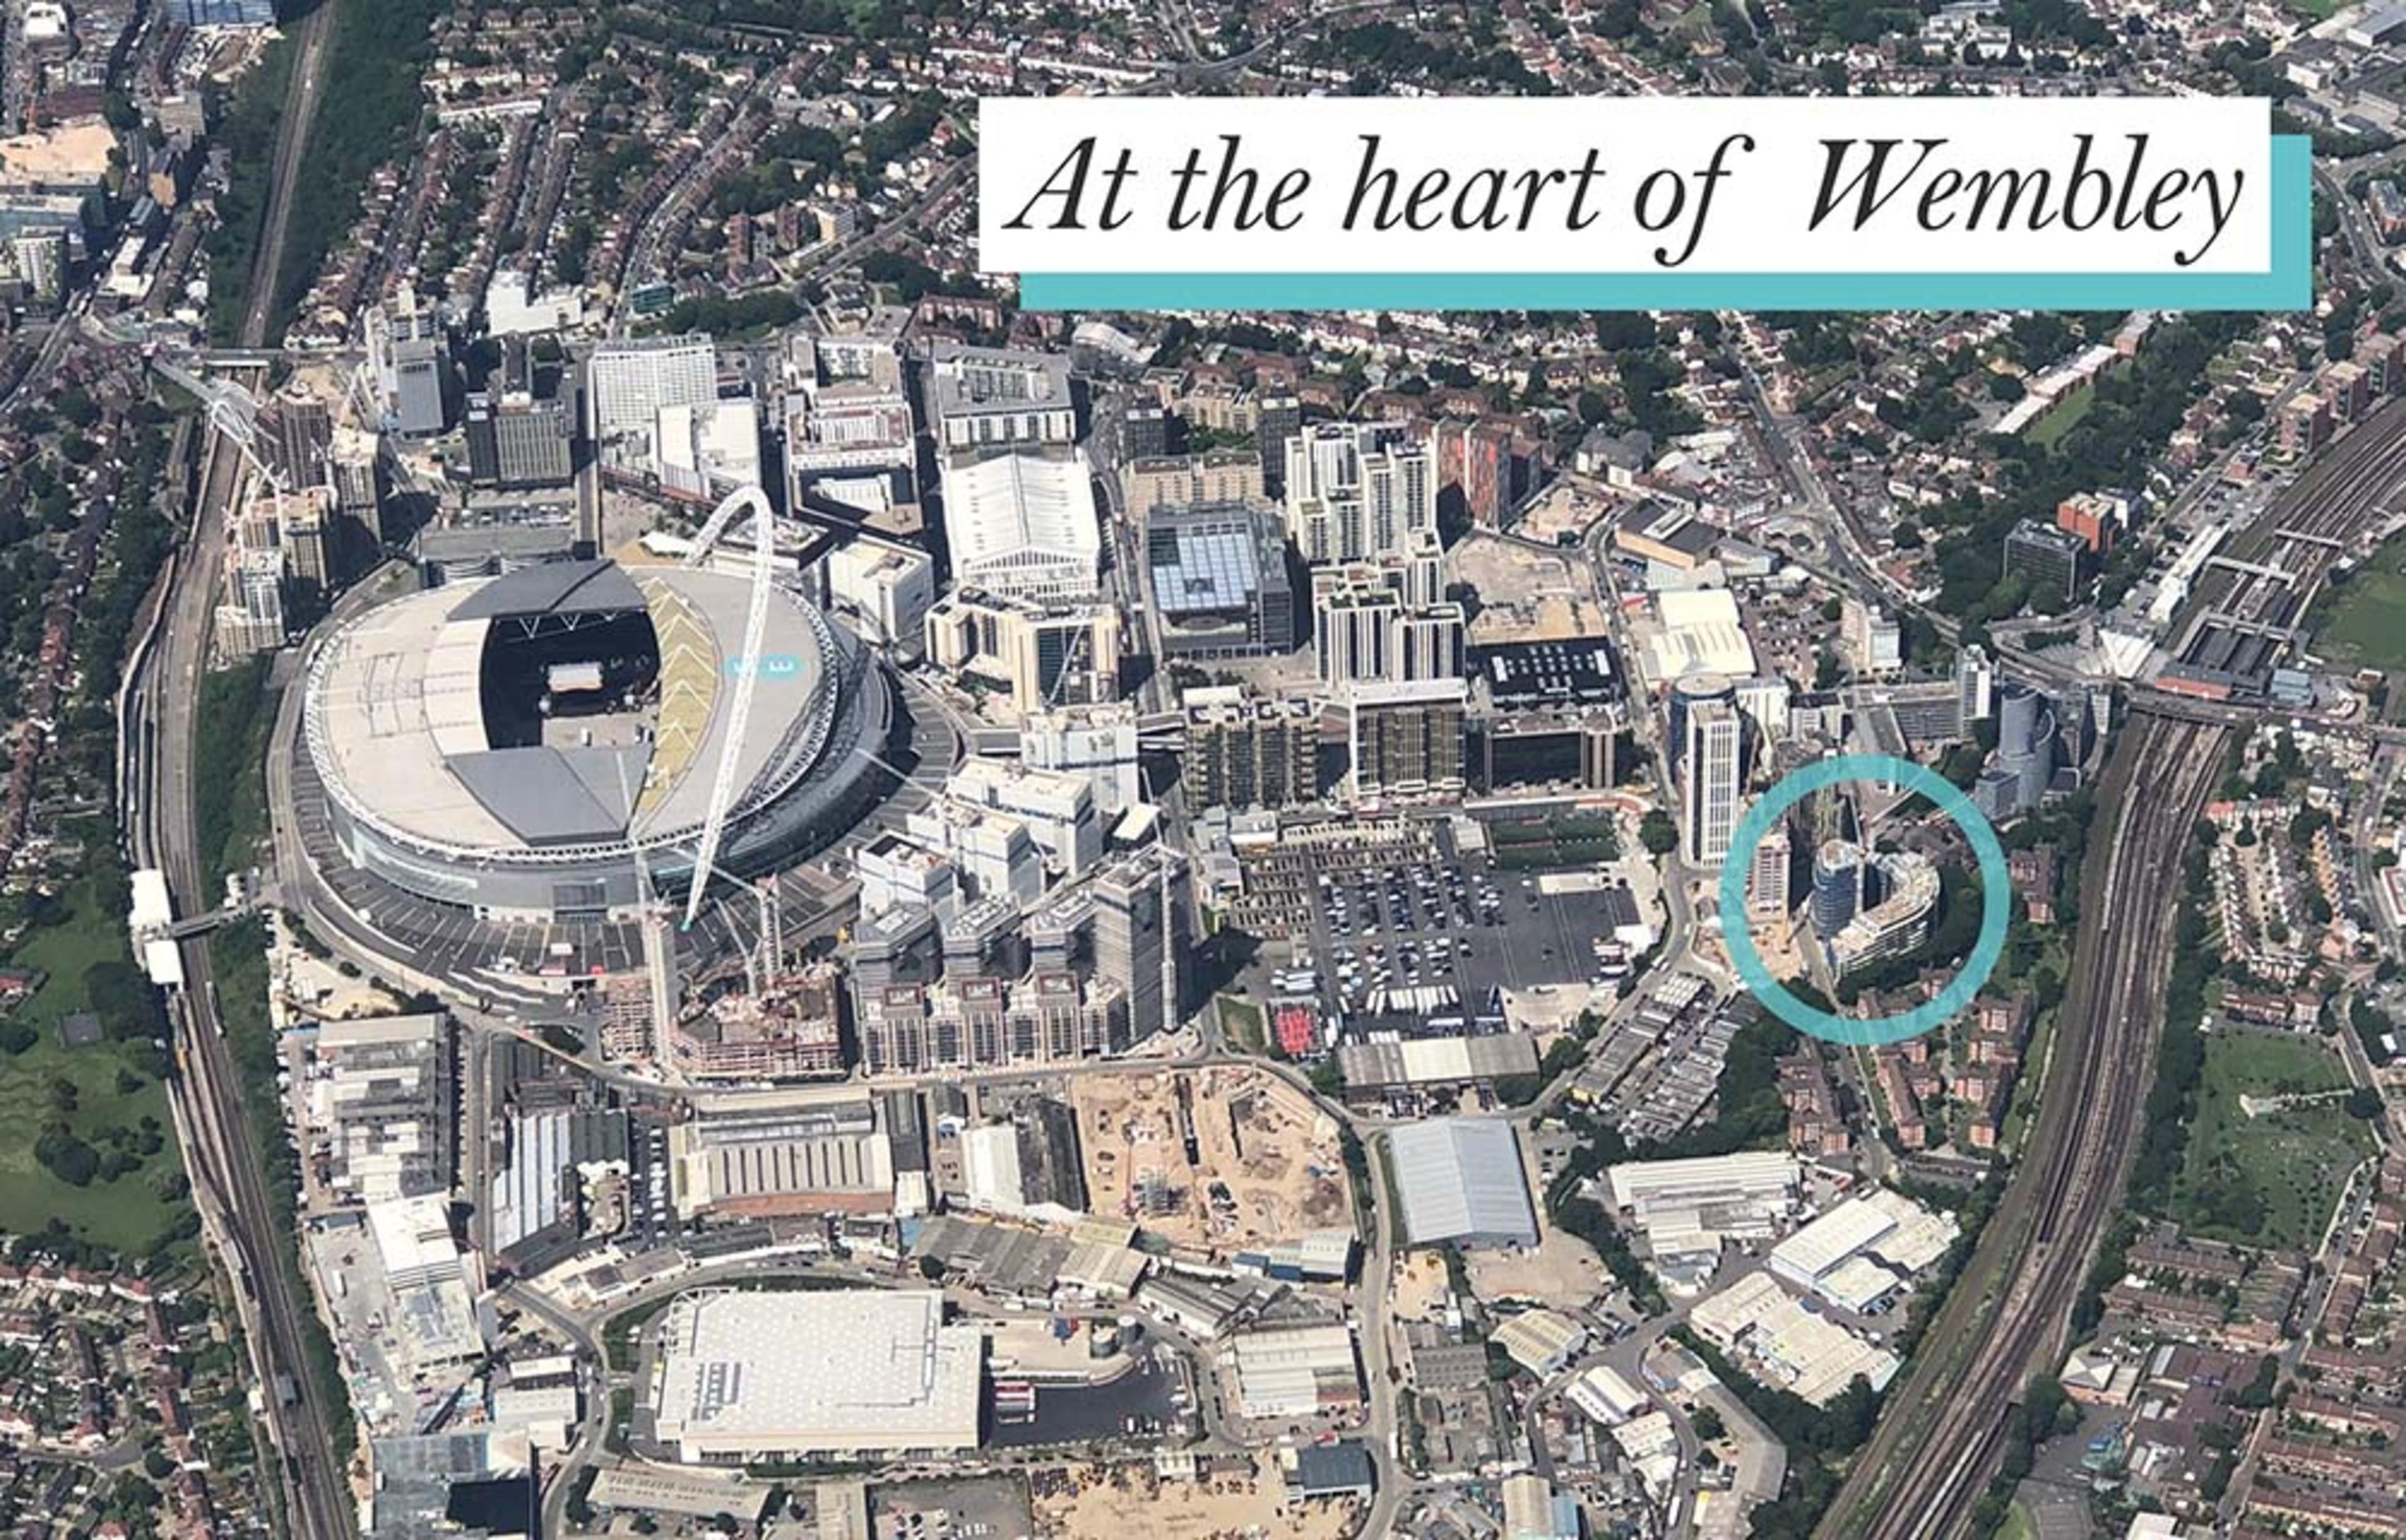 persona-homes-anthology-wembley-parade-flats-for-sale-wembley-aerial-with-banner